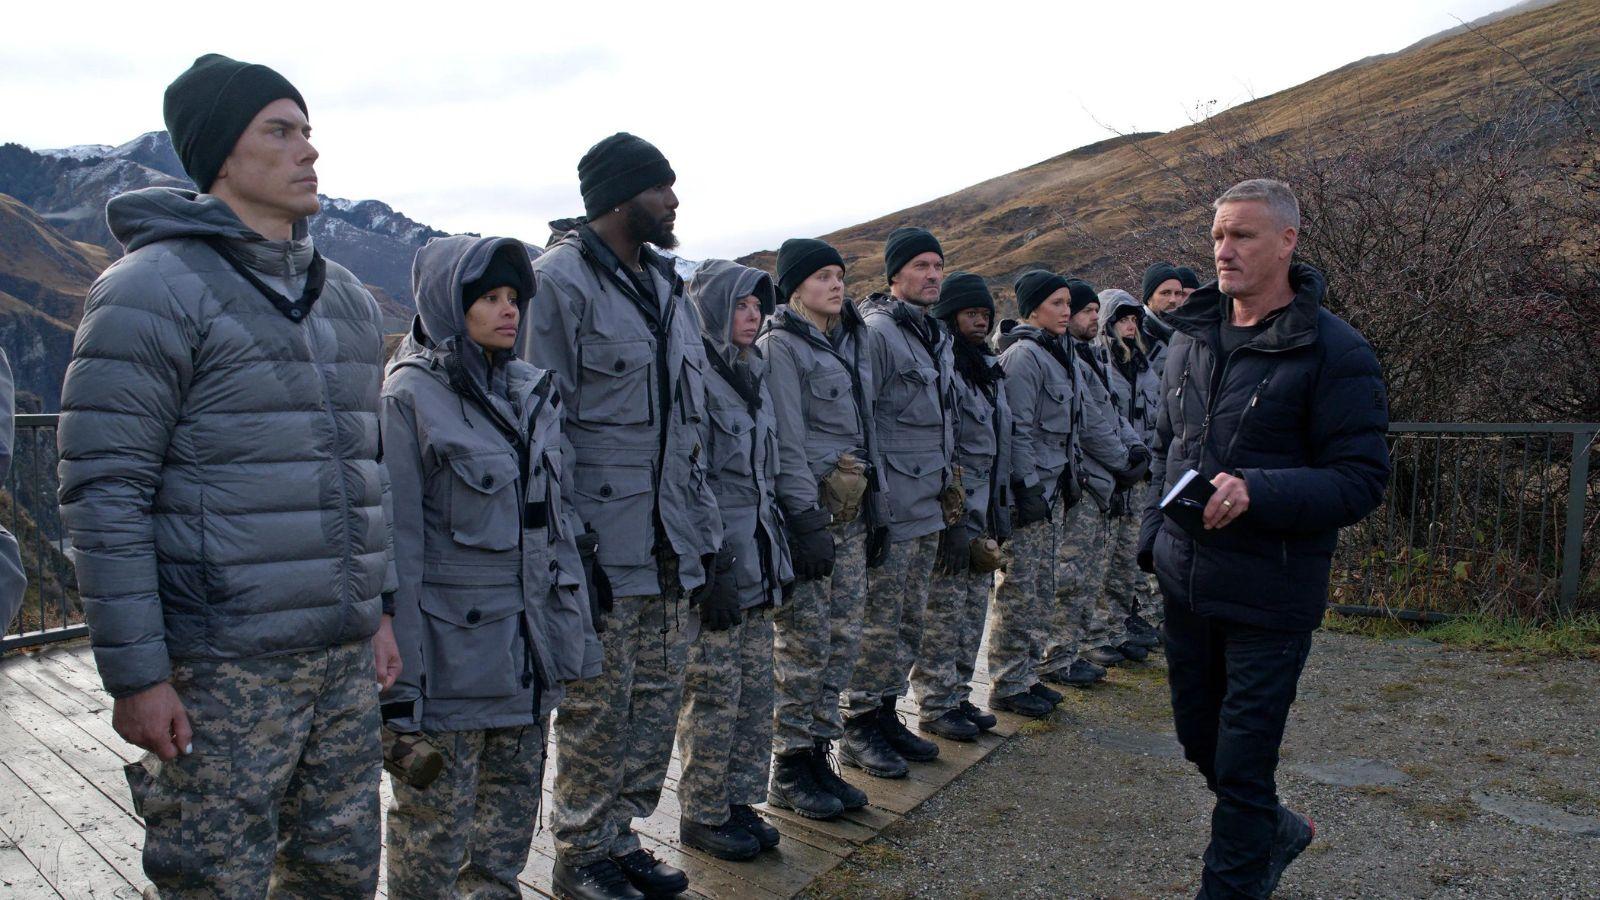 Recruits lined up in Special Forces Season 2